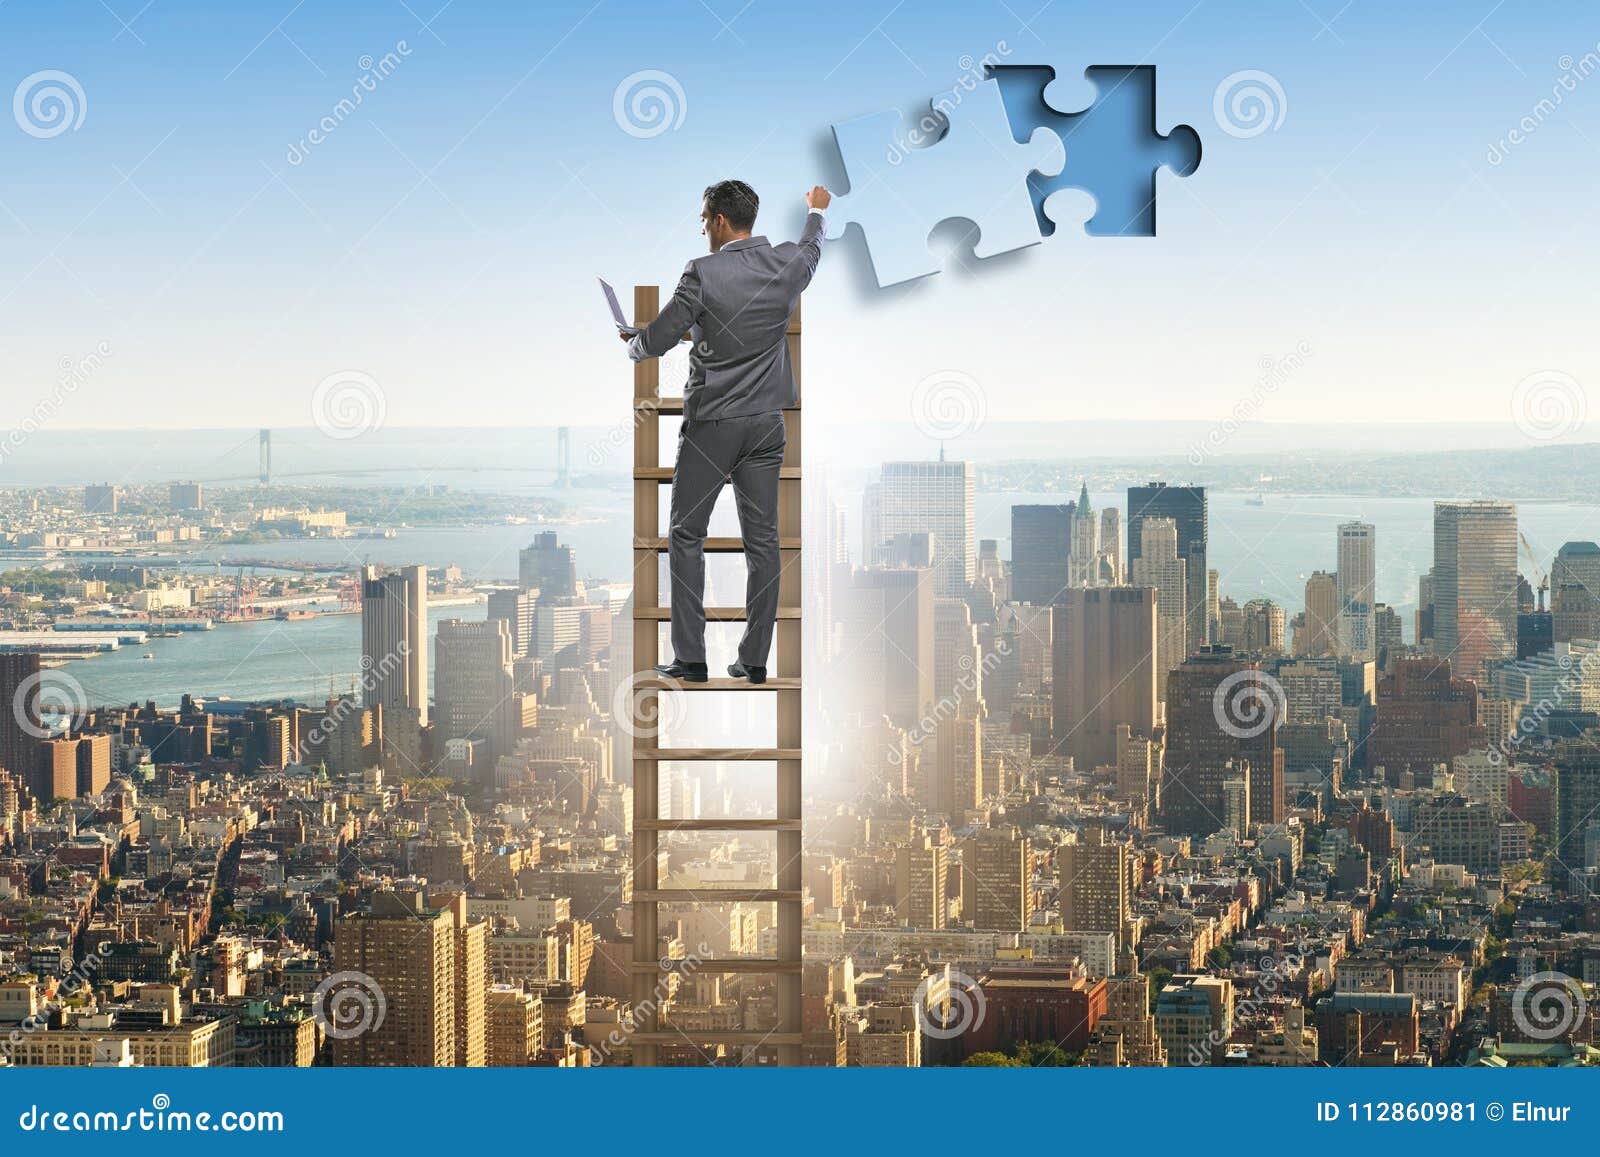 The Businessman Putting Together Jigsaw Puzzle Pieces Stock Image